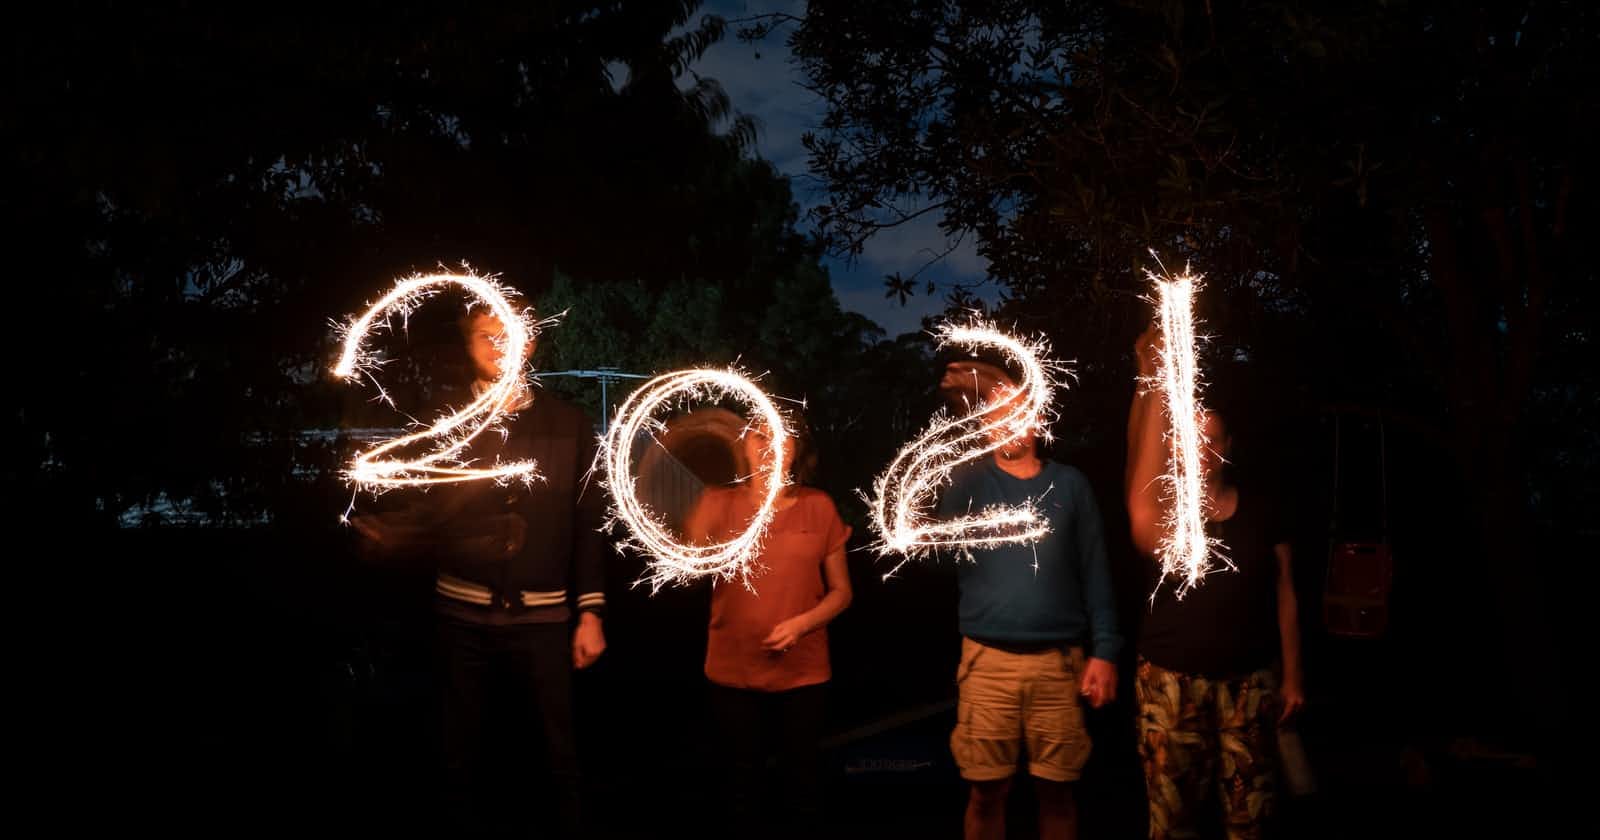 A Year in Review: 2021 Was My Best Year